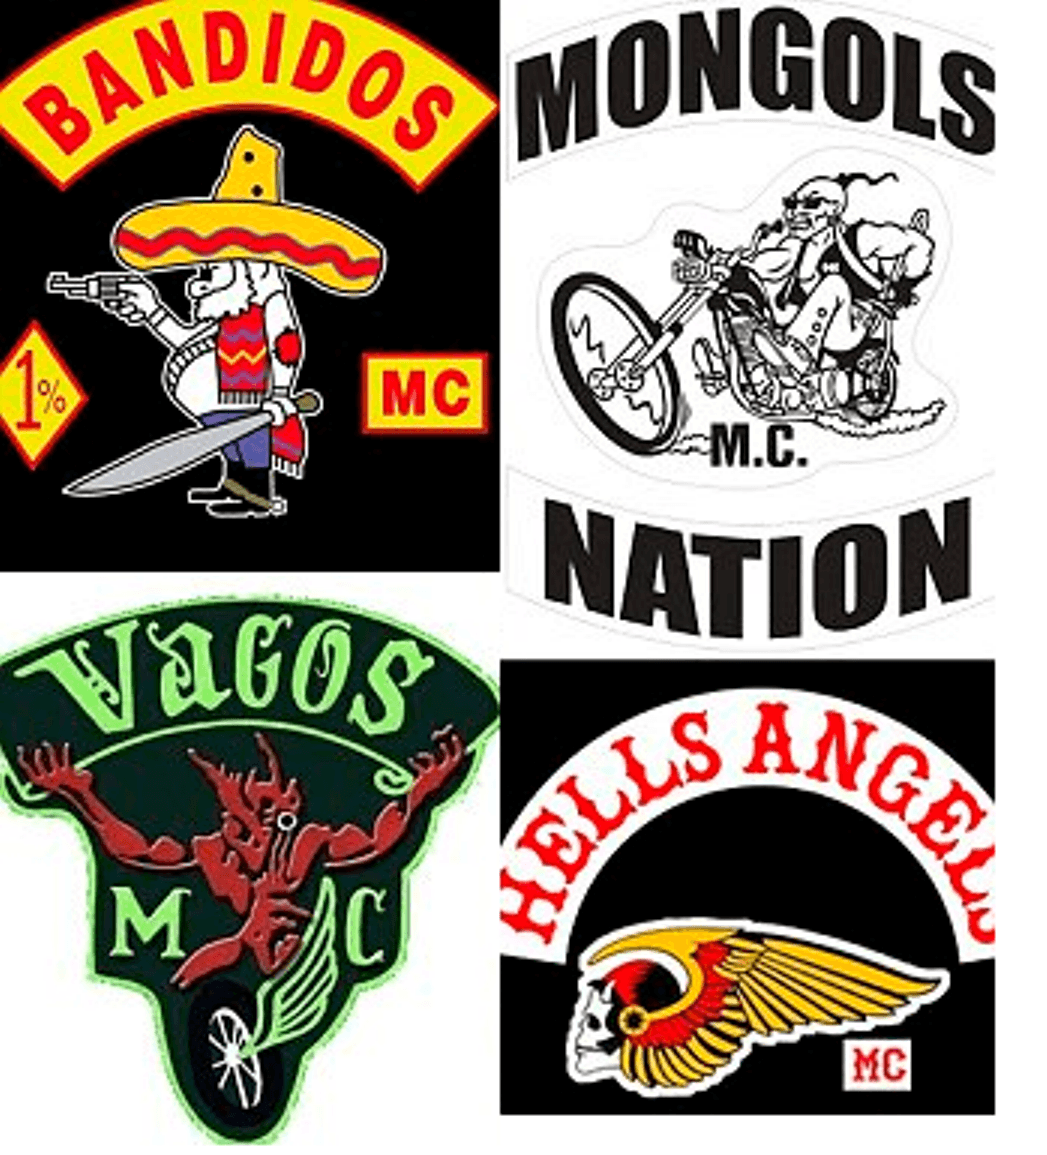 Gangs Logo - Feds Go After Violent Motorcycle Gangs by Claiming Rights to Their